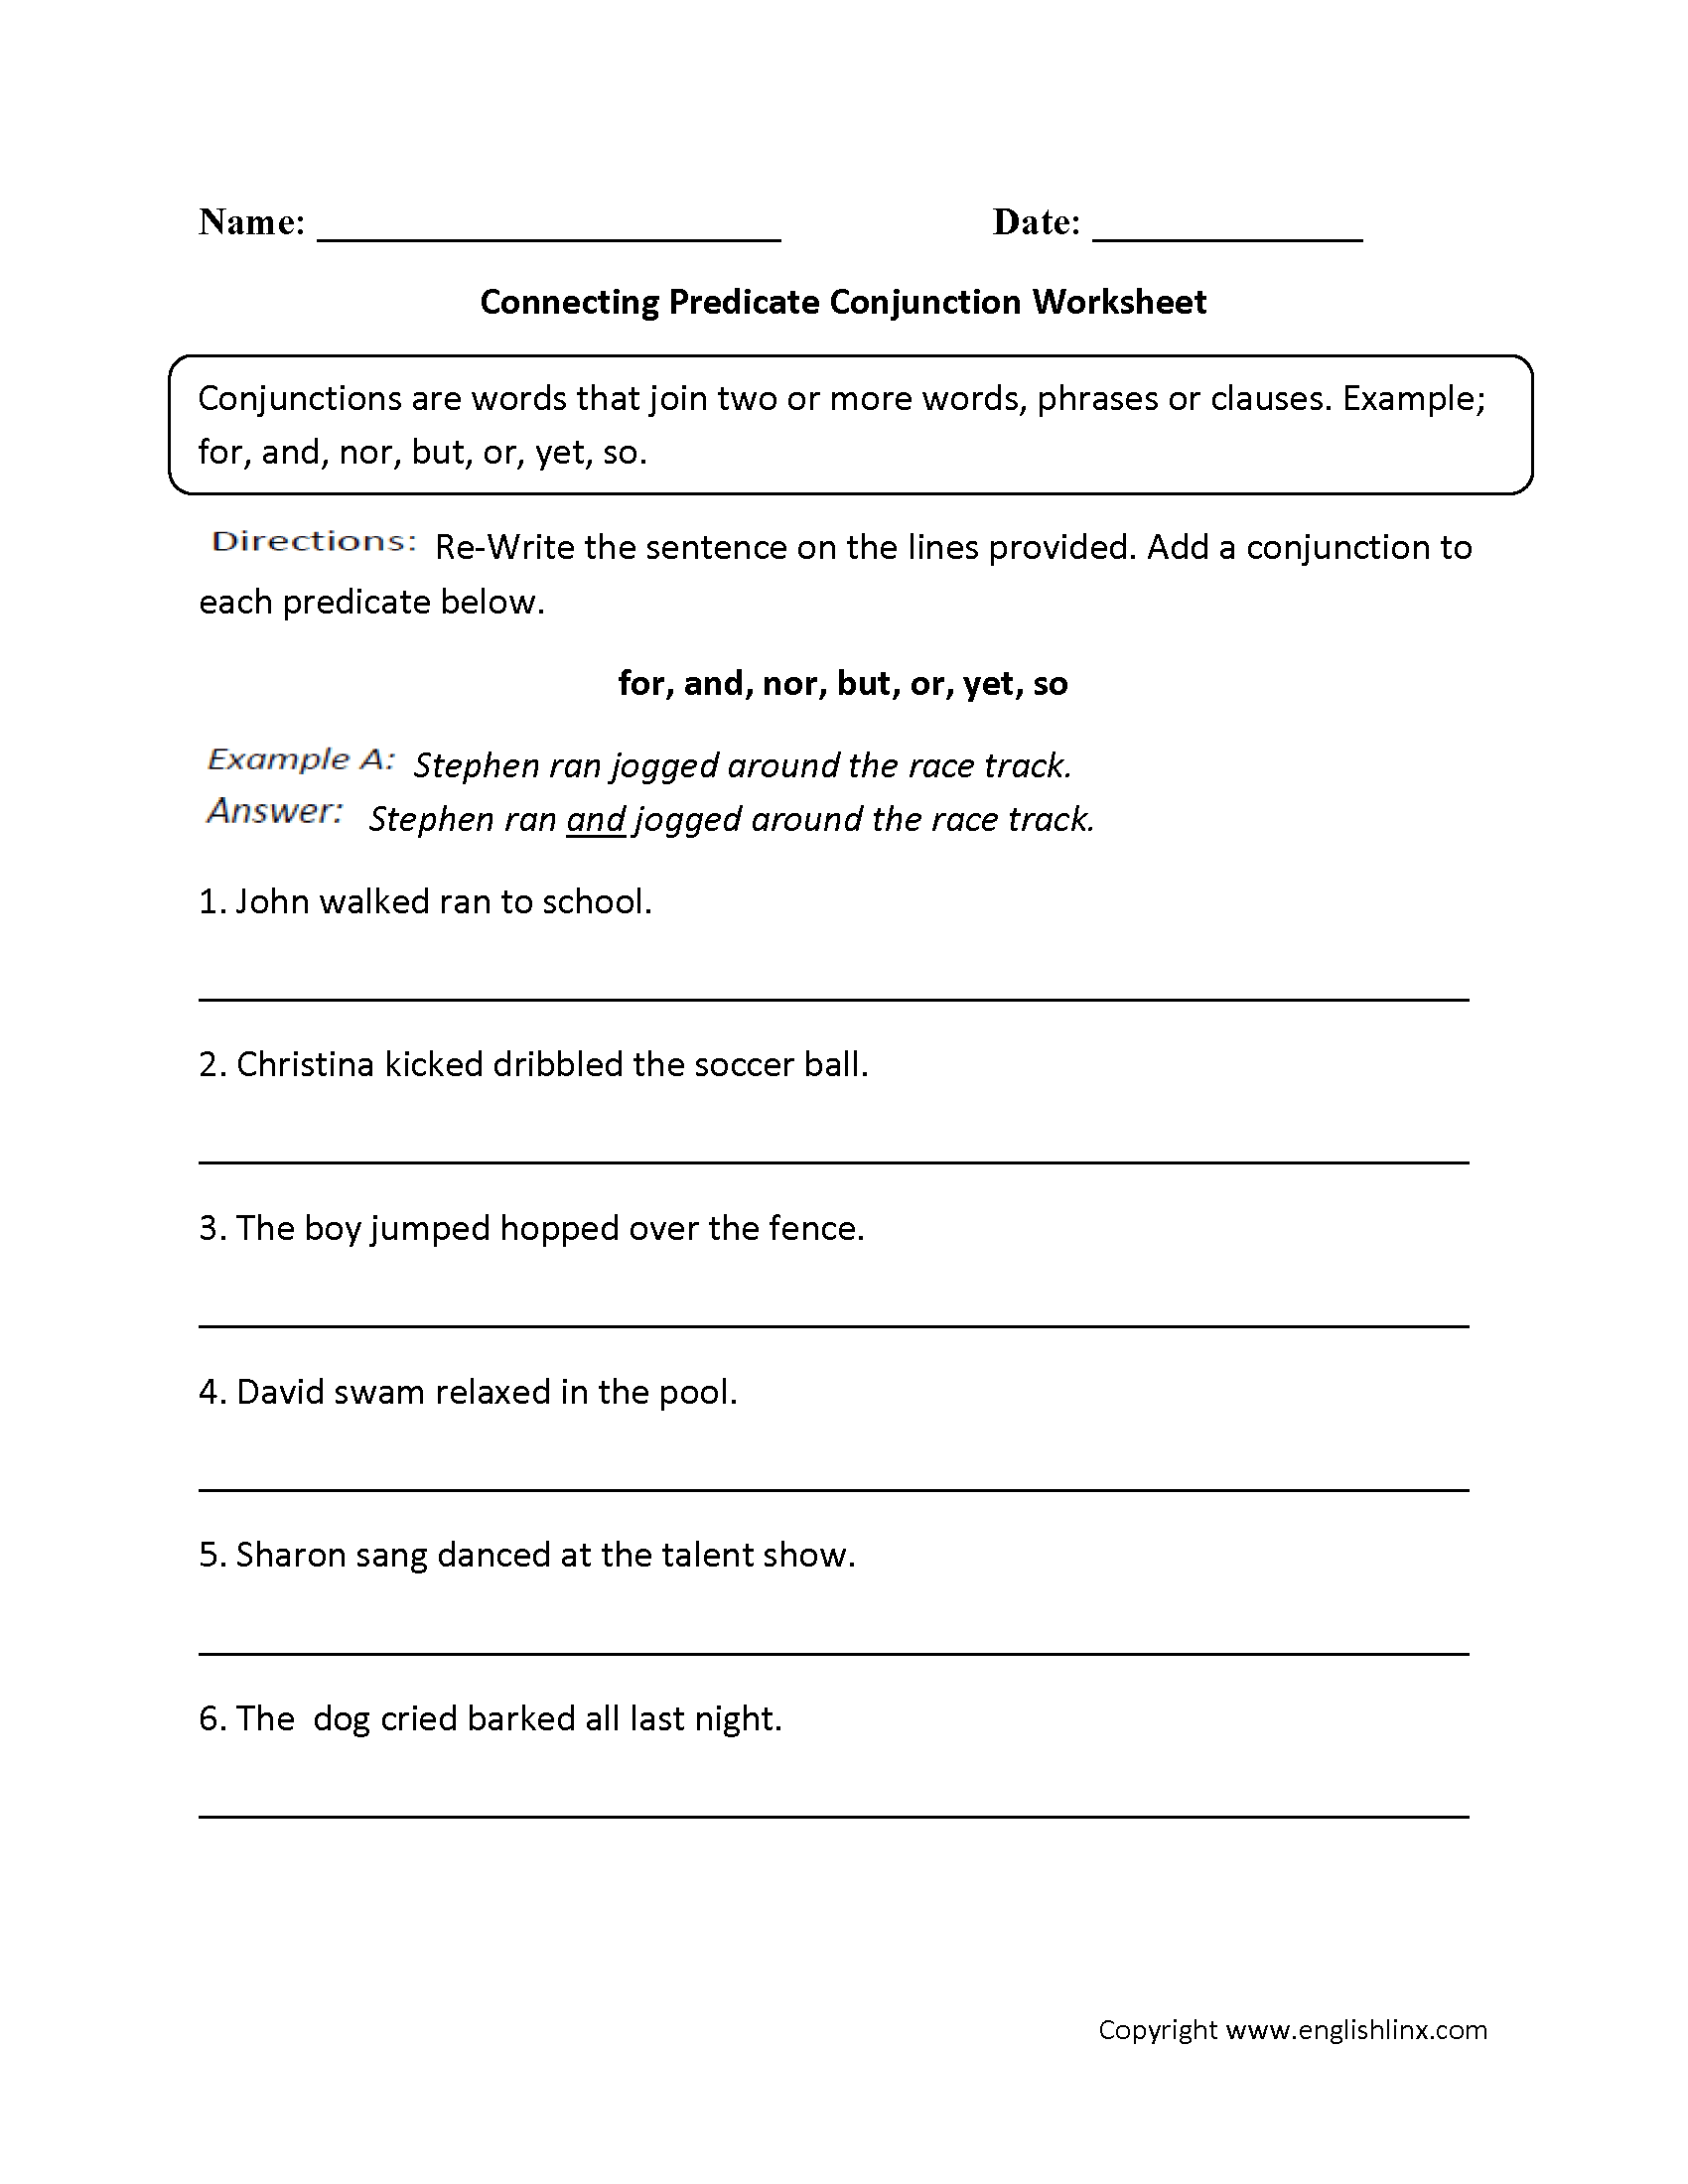 Connecting Predicate Conjunction Worksheets